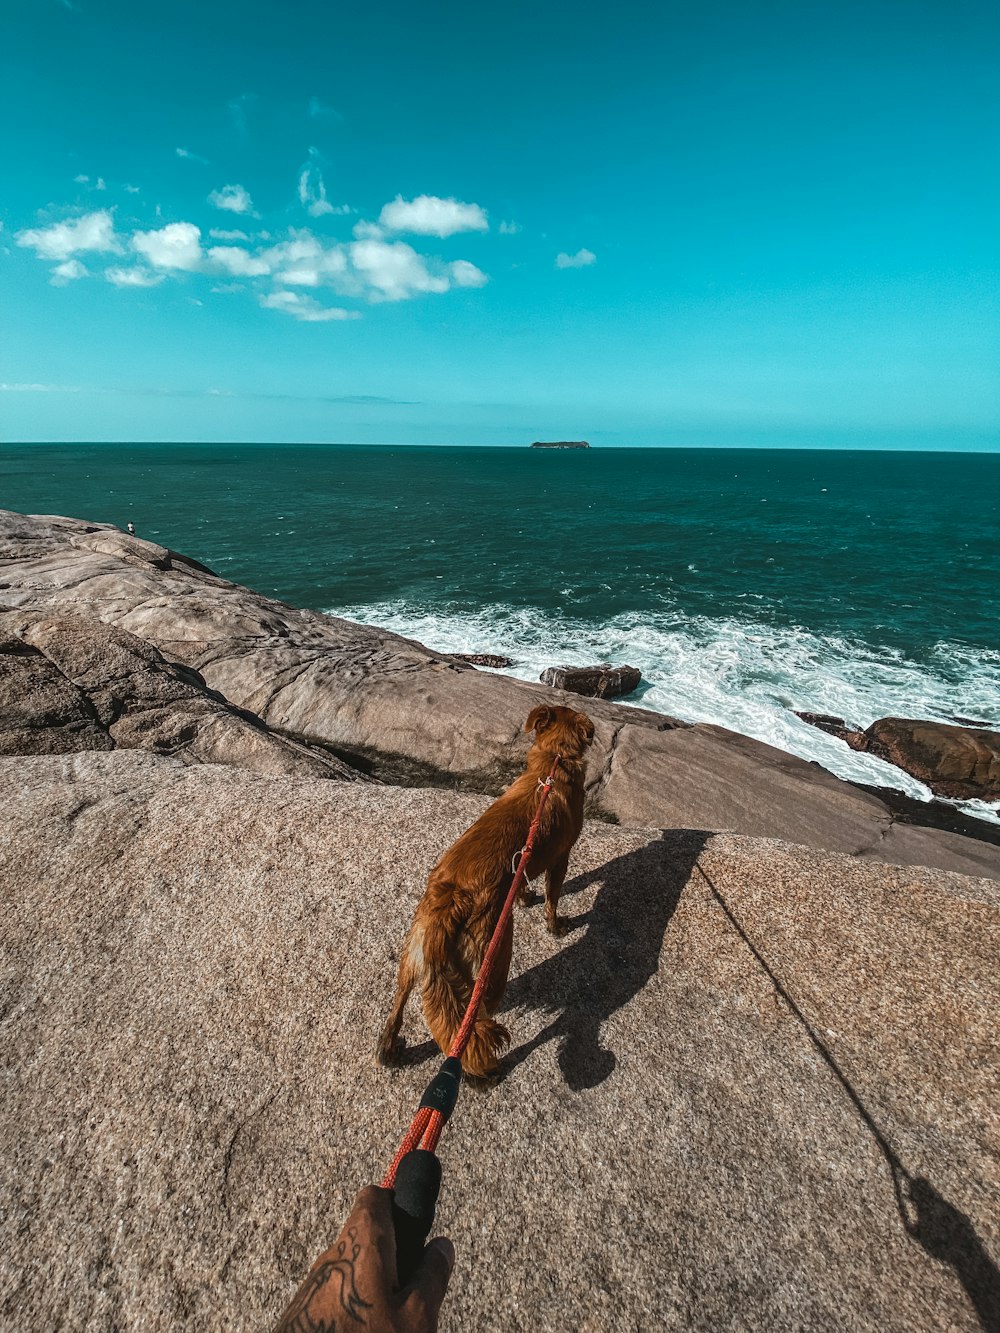 a person holding a lizard on a rock by the ocean